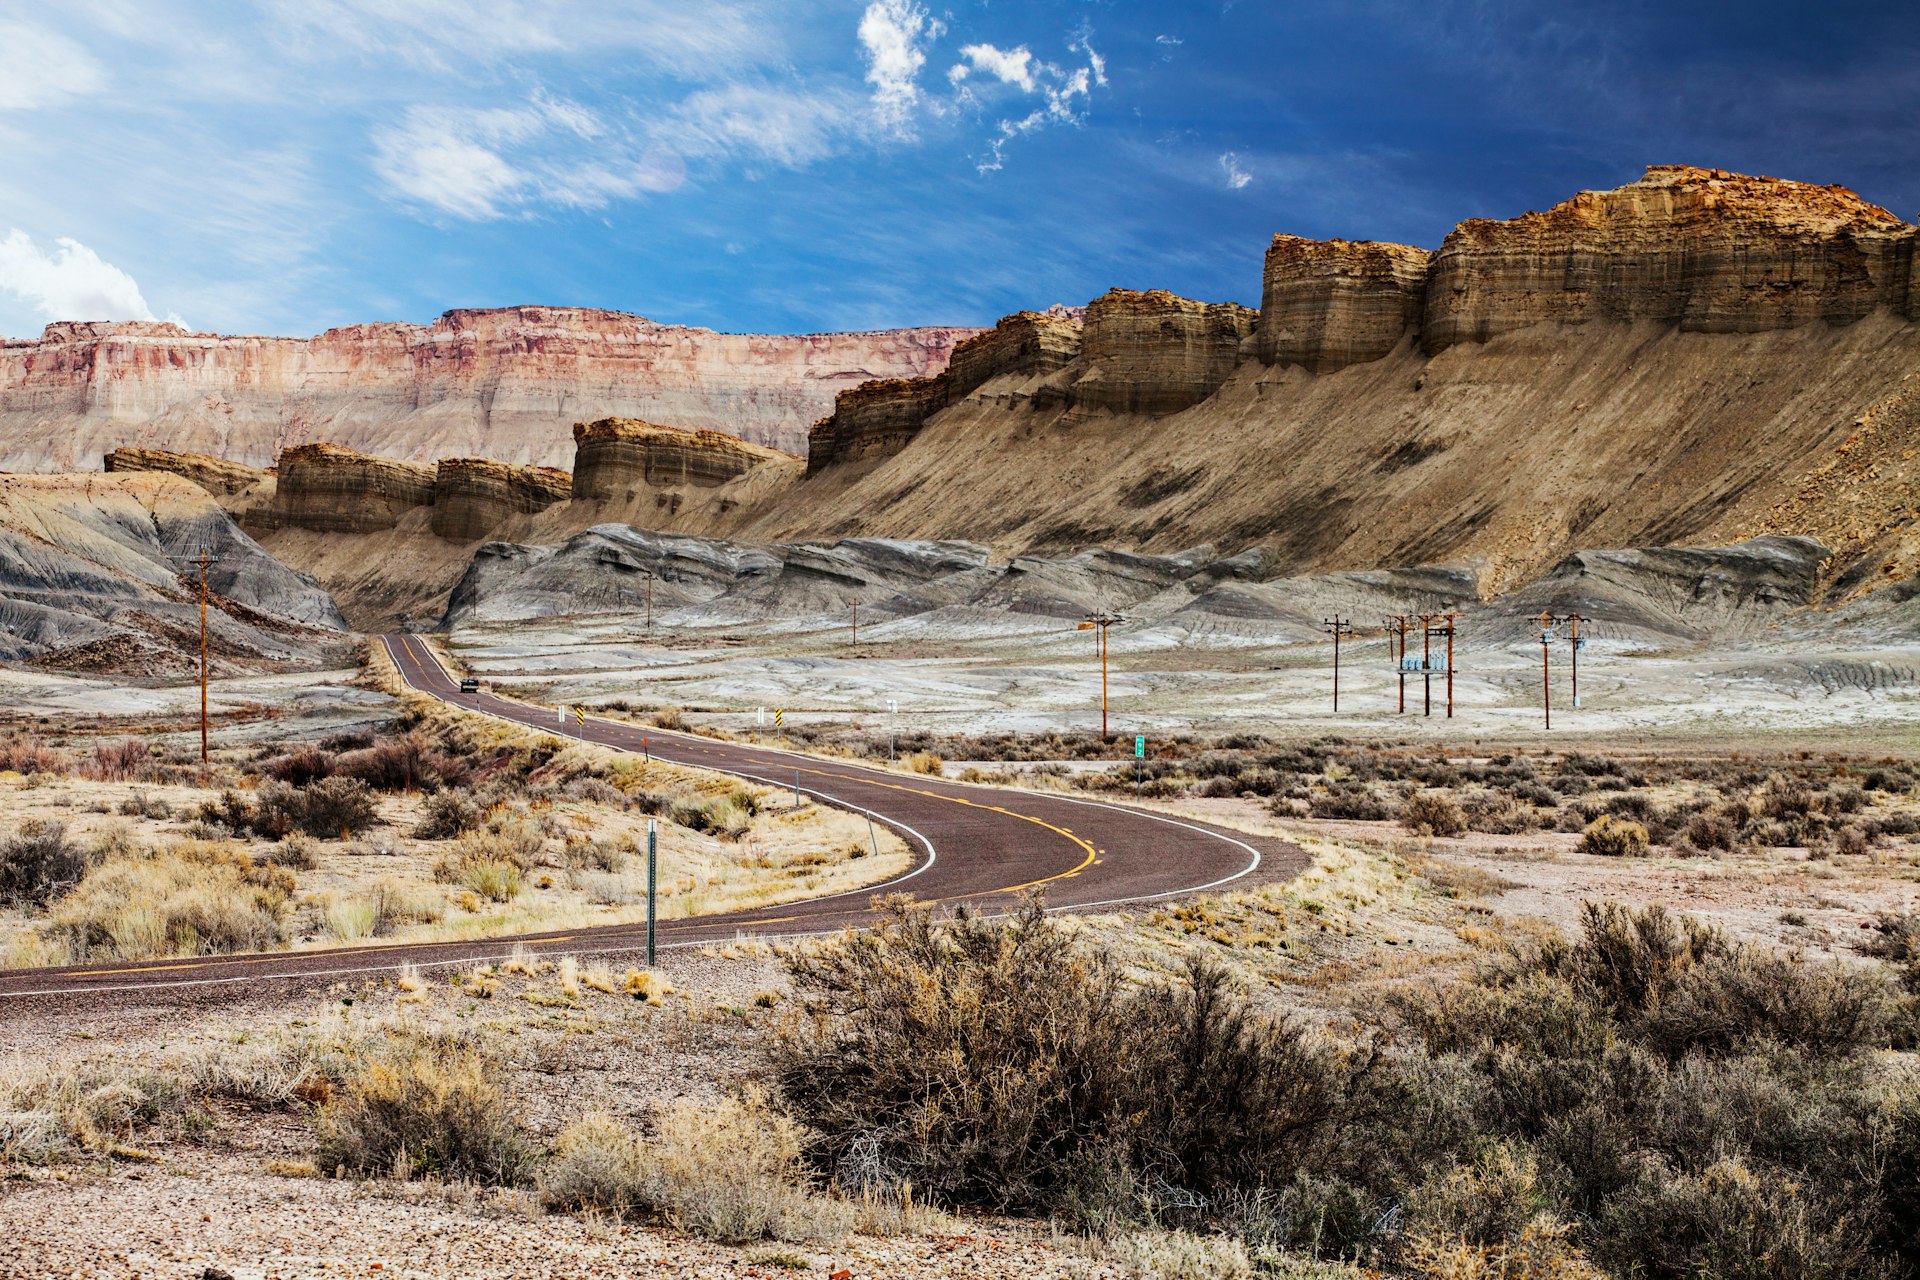 A road winds through incredible natural stone formations in the shape of stepping stones that tower above the road